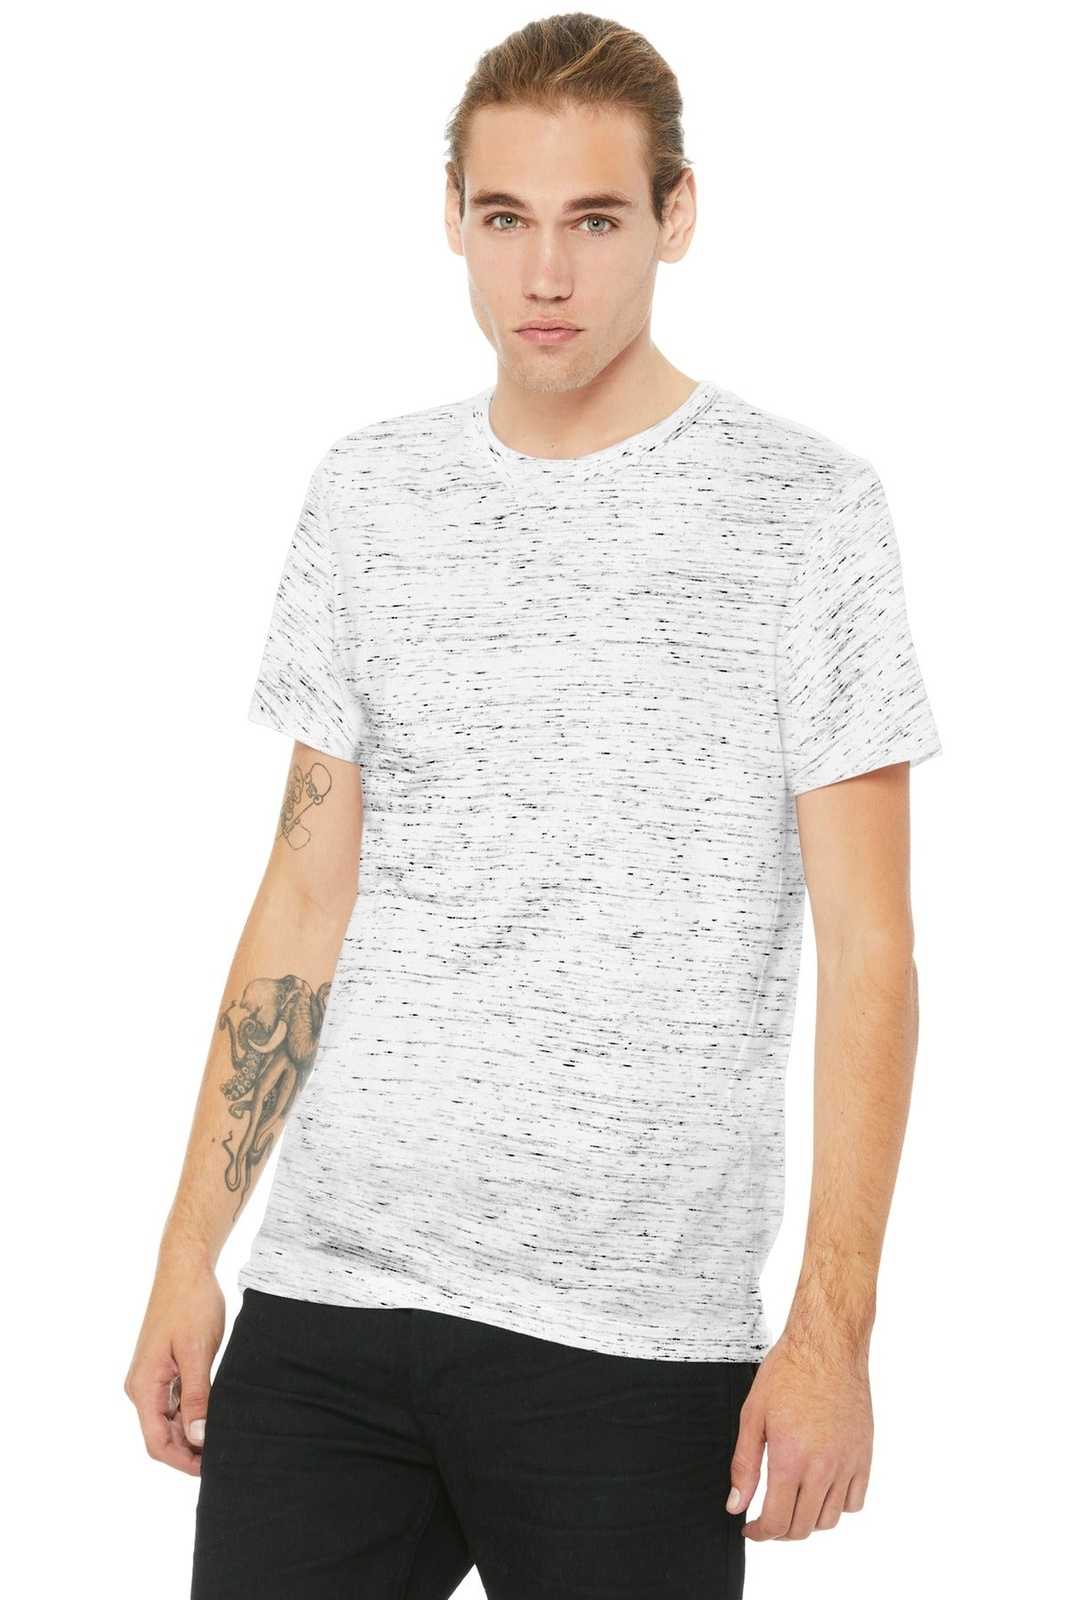 Bella + Canvas 3650 Unisex Poly-Cotton Short Sleeve Tee - White Marble - HIT a Double